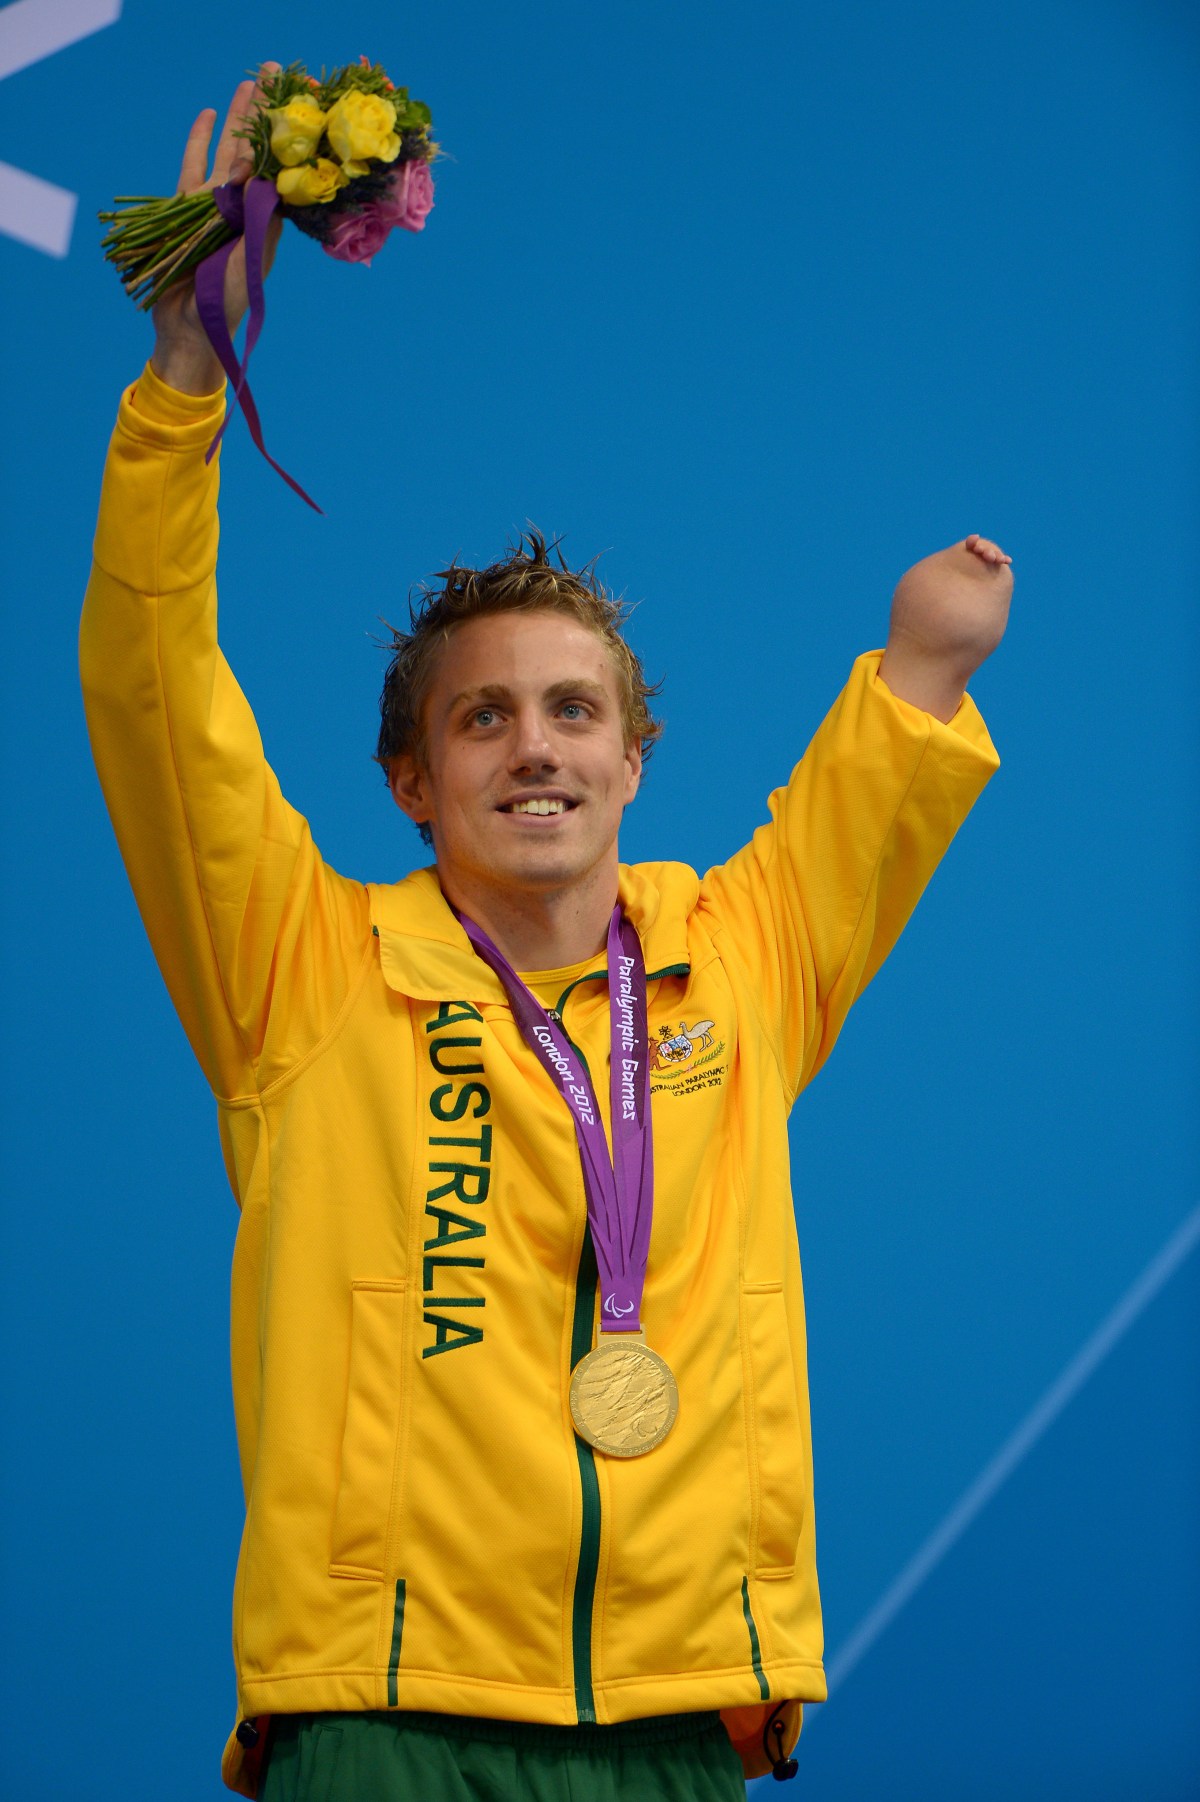 Supplied photo made available Saturday, Sept. 8, 2012, of swimmer Matthew Cowdrey from Australia celebrating his gold medal win in the Men's 400m Free S9 event at the Paralympic Games in London on Friday, Sept. 7, 2012. (AAP Image/Australian Paralympic Committee, Jeff Crow) NO ARCHIVING, EDITORIAL USE ONLY